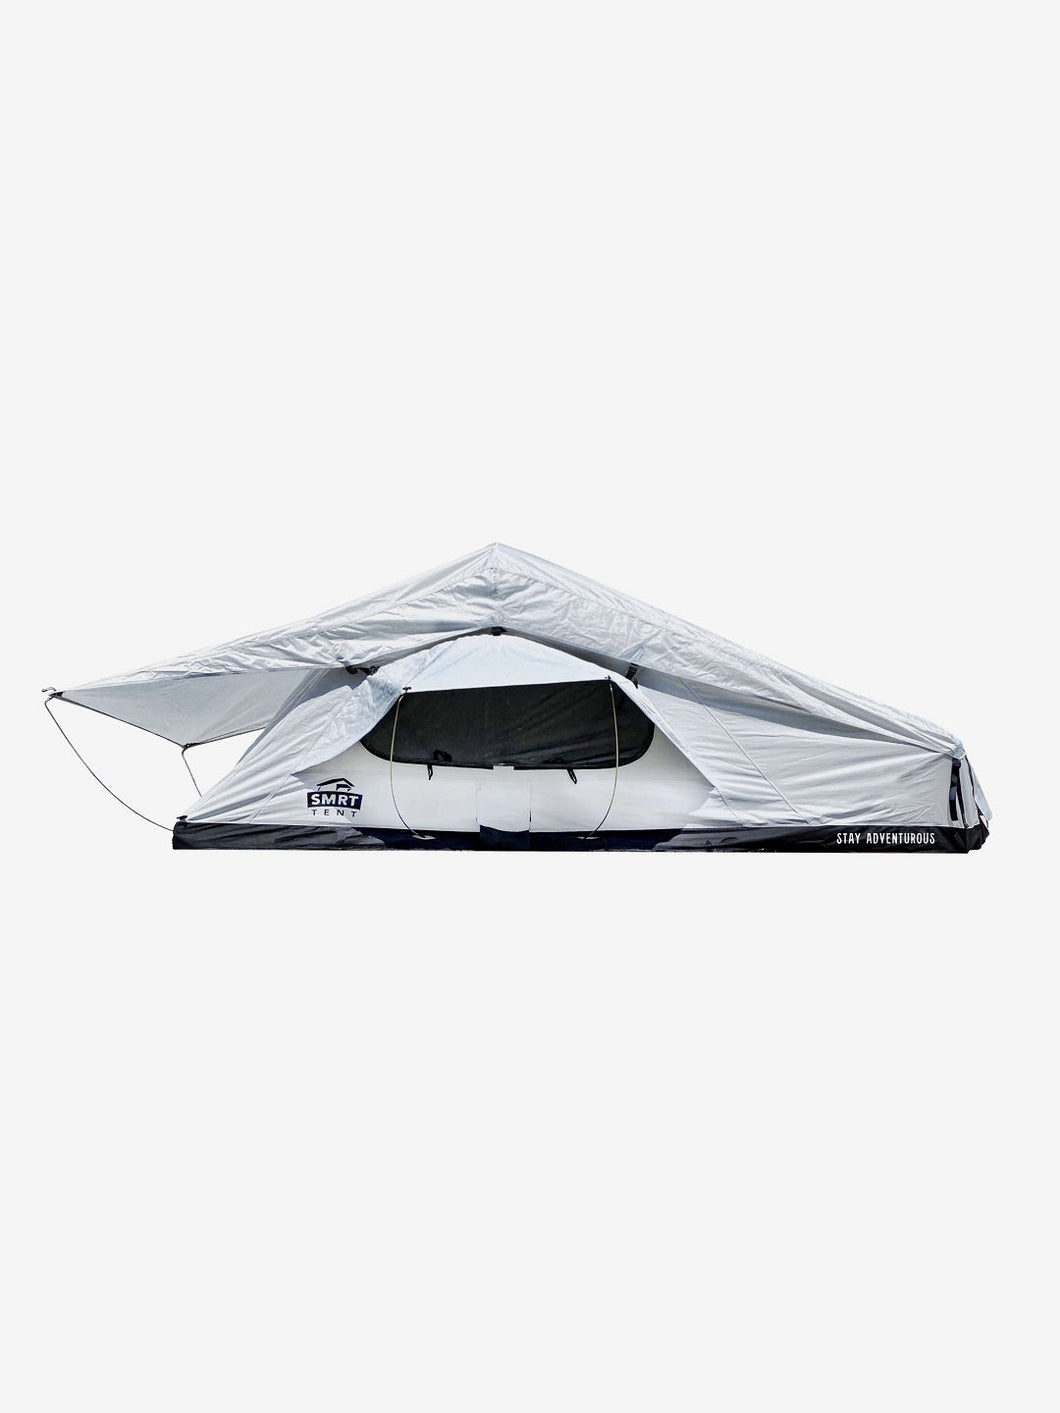 Pictured in a light, white-ish grey is a completely set-up softshell roof top tent. This is “The” Softshell, a roof top tent perfect for all overland roof top tent family outdoor camping! Available for sale by SMRT Tent in Edmonton, Canada.